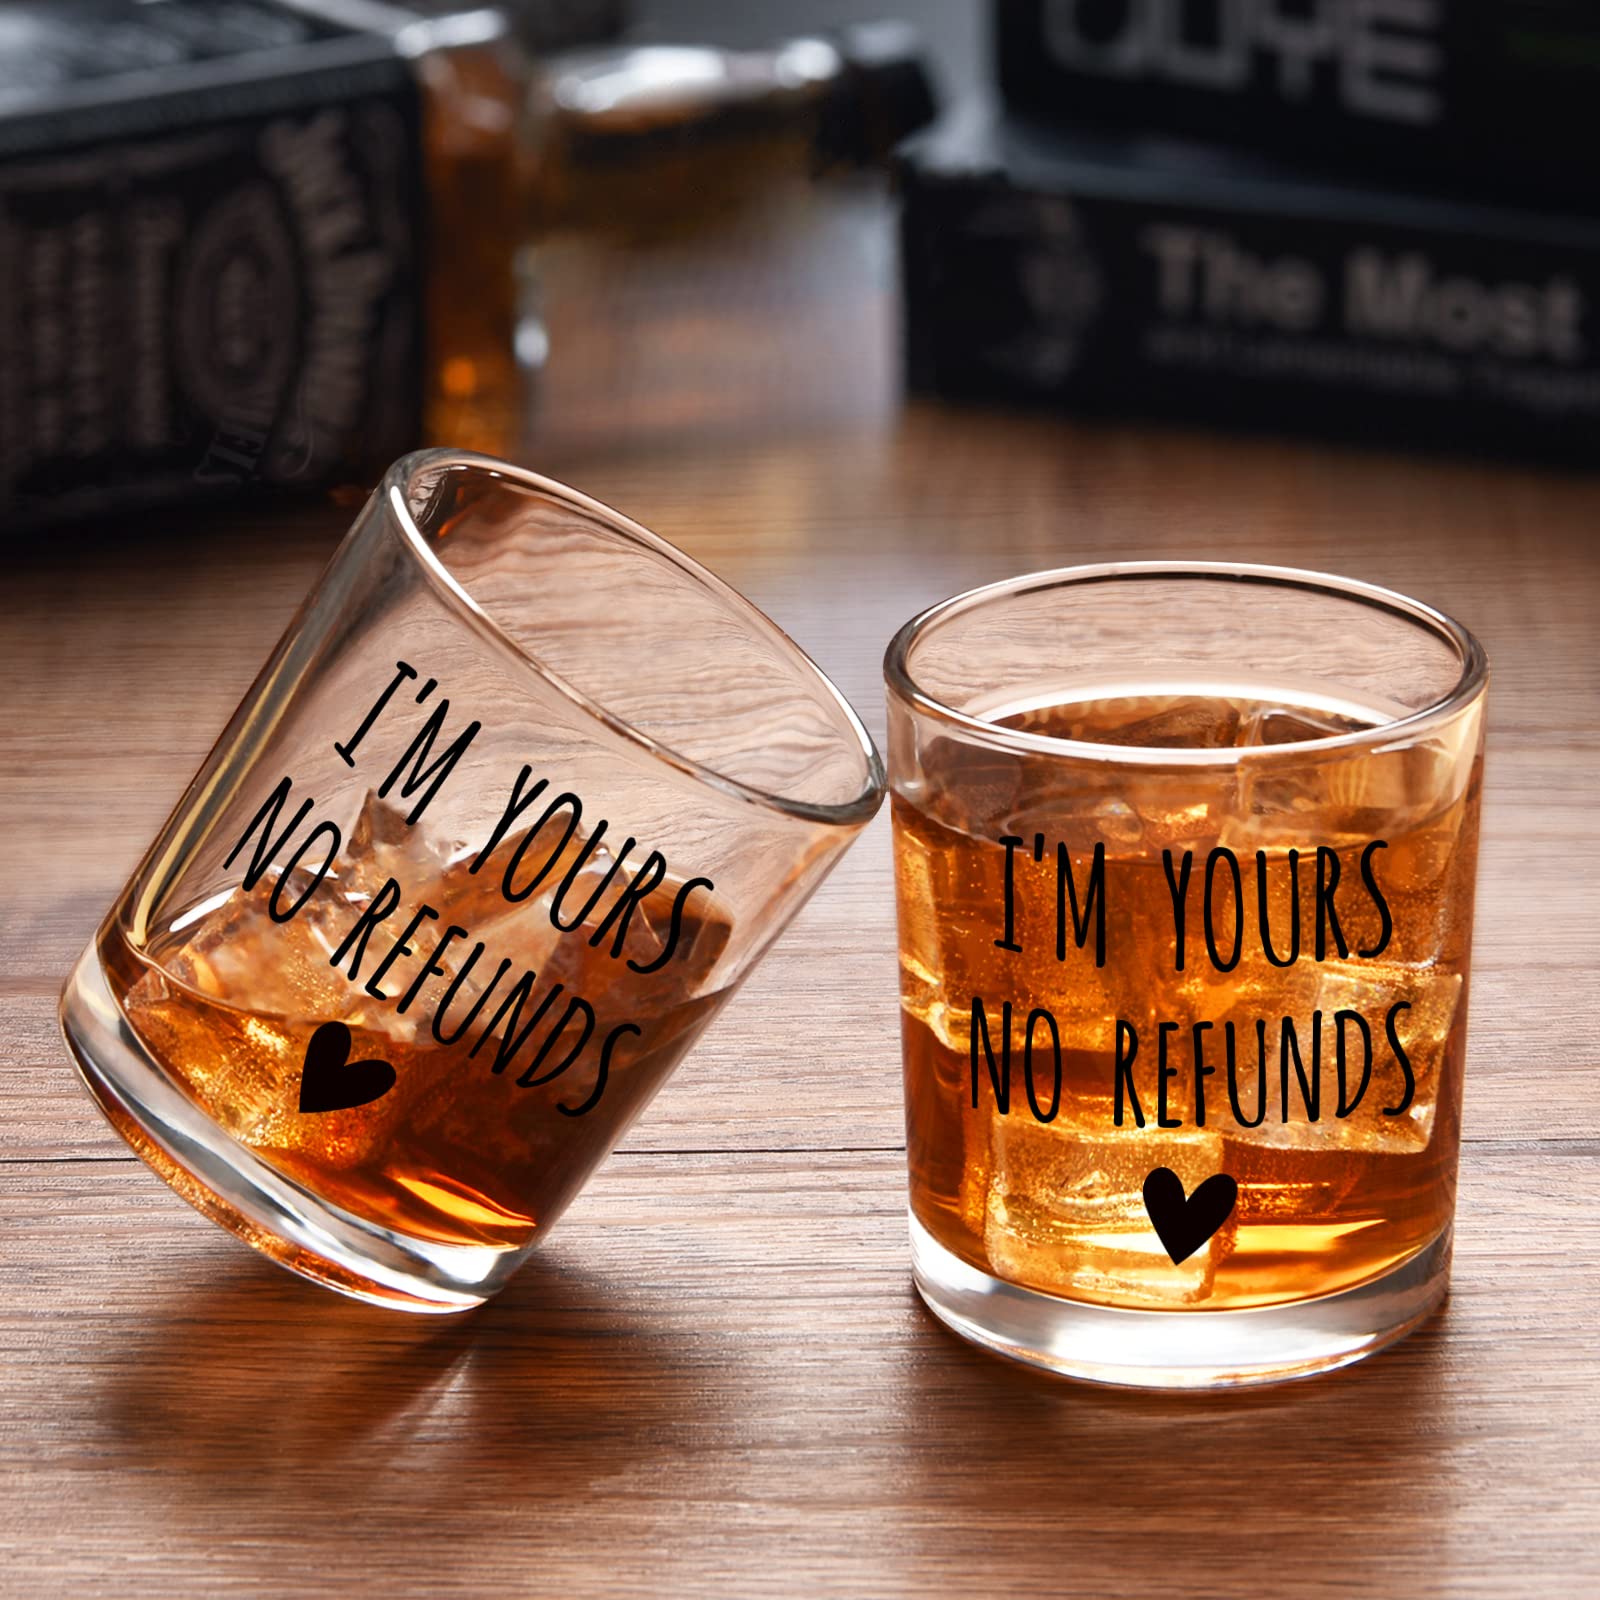 Futtumy I'm Yours No Refunds Whiskey Glass 10 oz, Valentine’s Day Gift for Her Him Husband Wife Girlfriend Boyfriend, Birthday Gift Christmas Gift Engagement Gift Wedding Gift Old Fashioned Glass